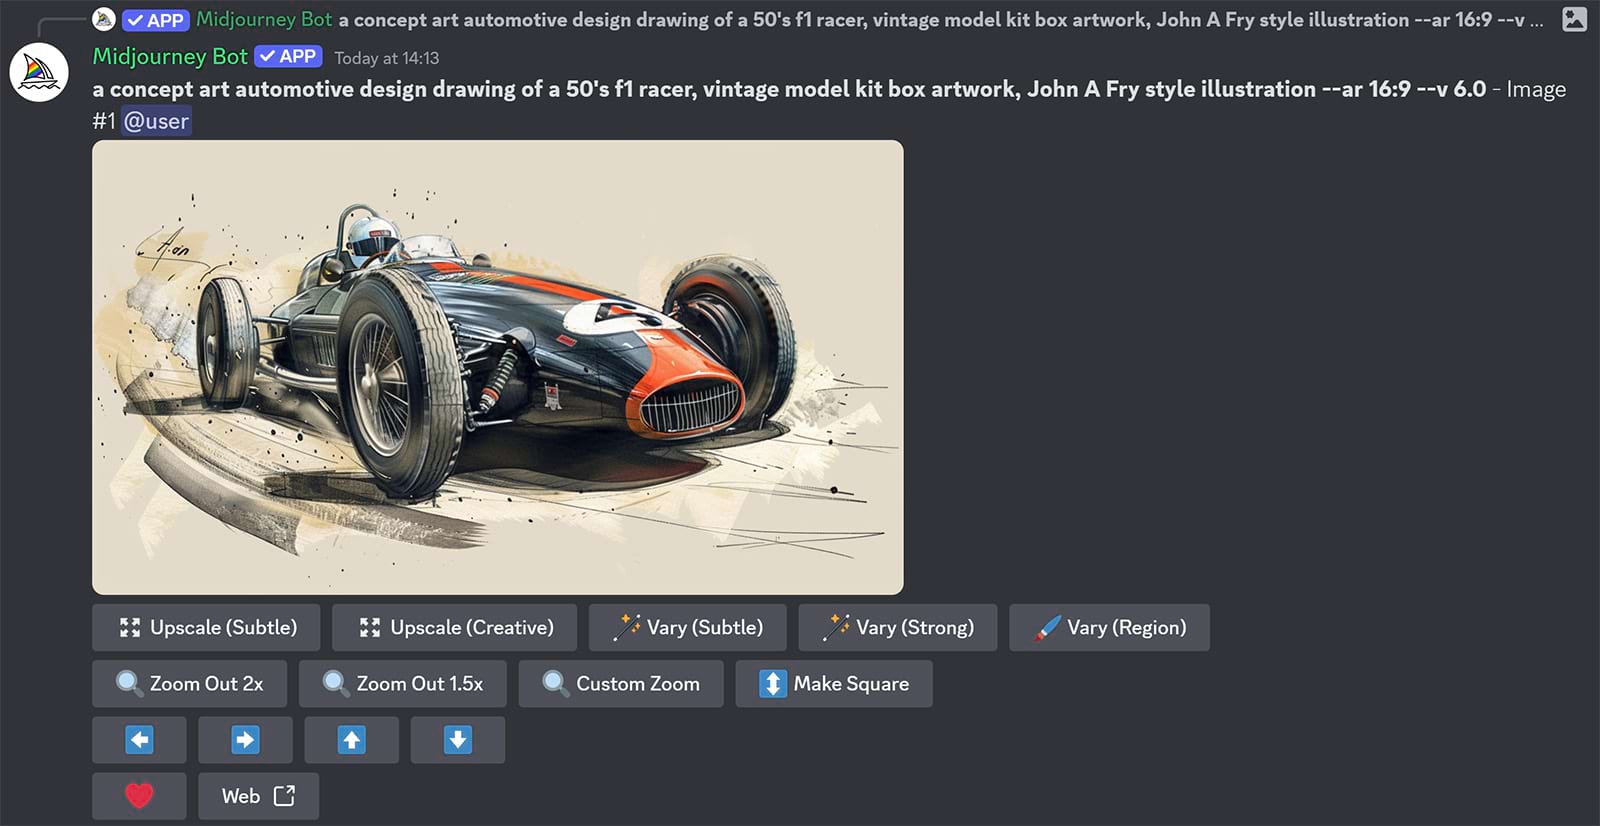 Midjourney Bot generated image of a F1 car artwork